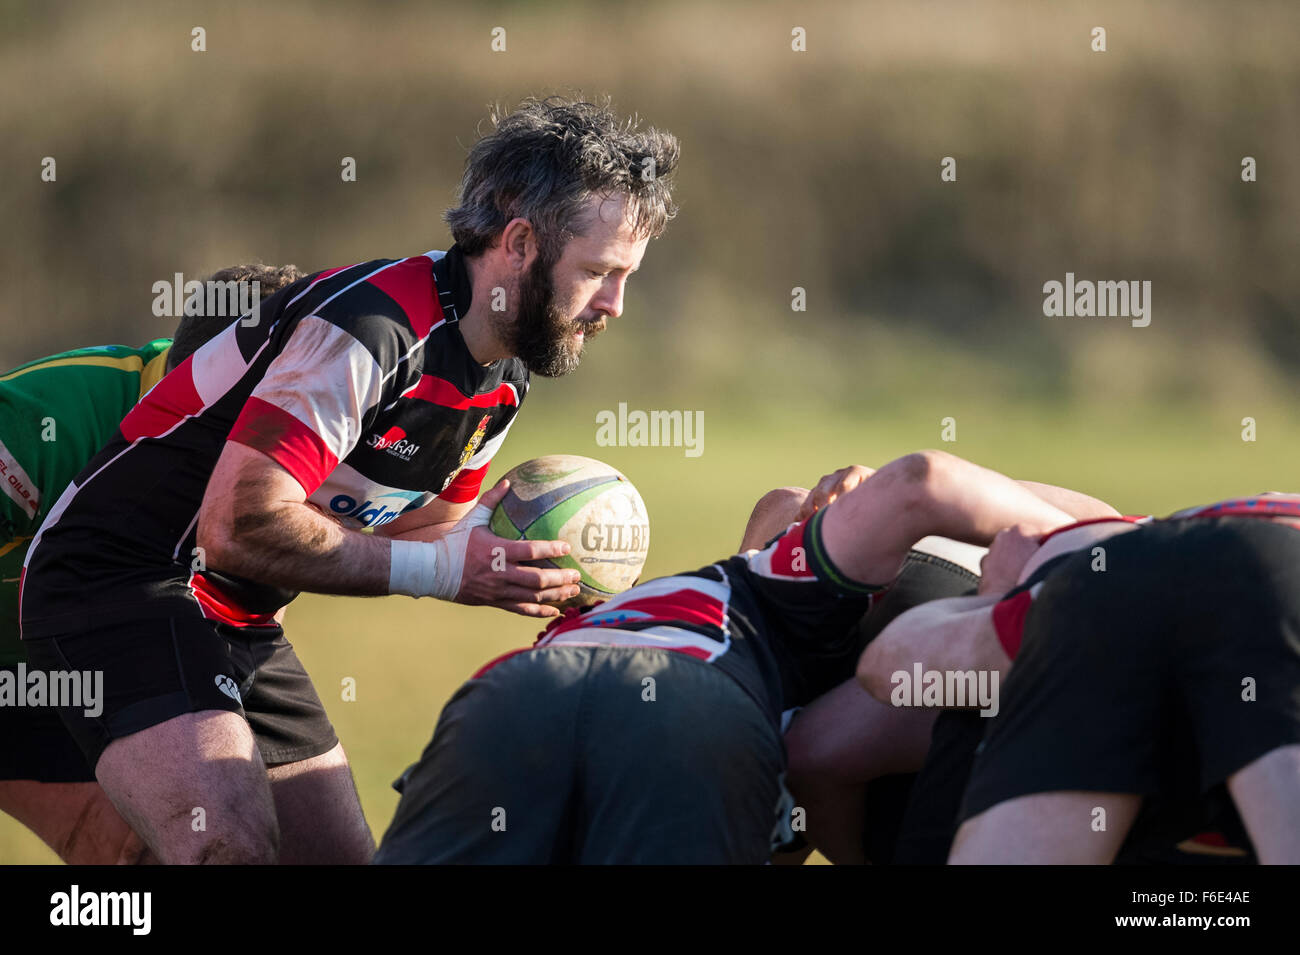 Rugby scrum half about to put ball into scrum Stock Photo